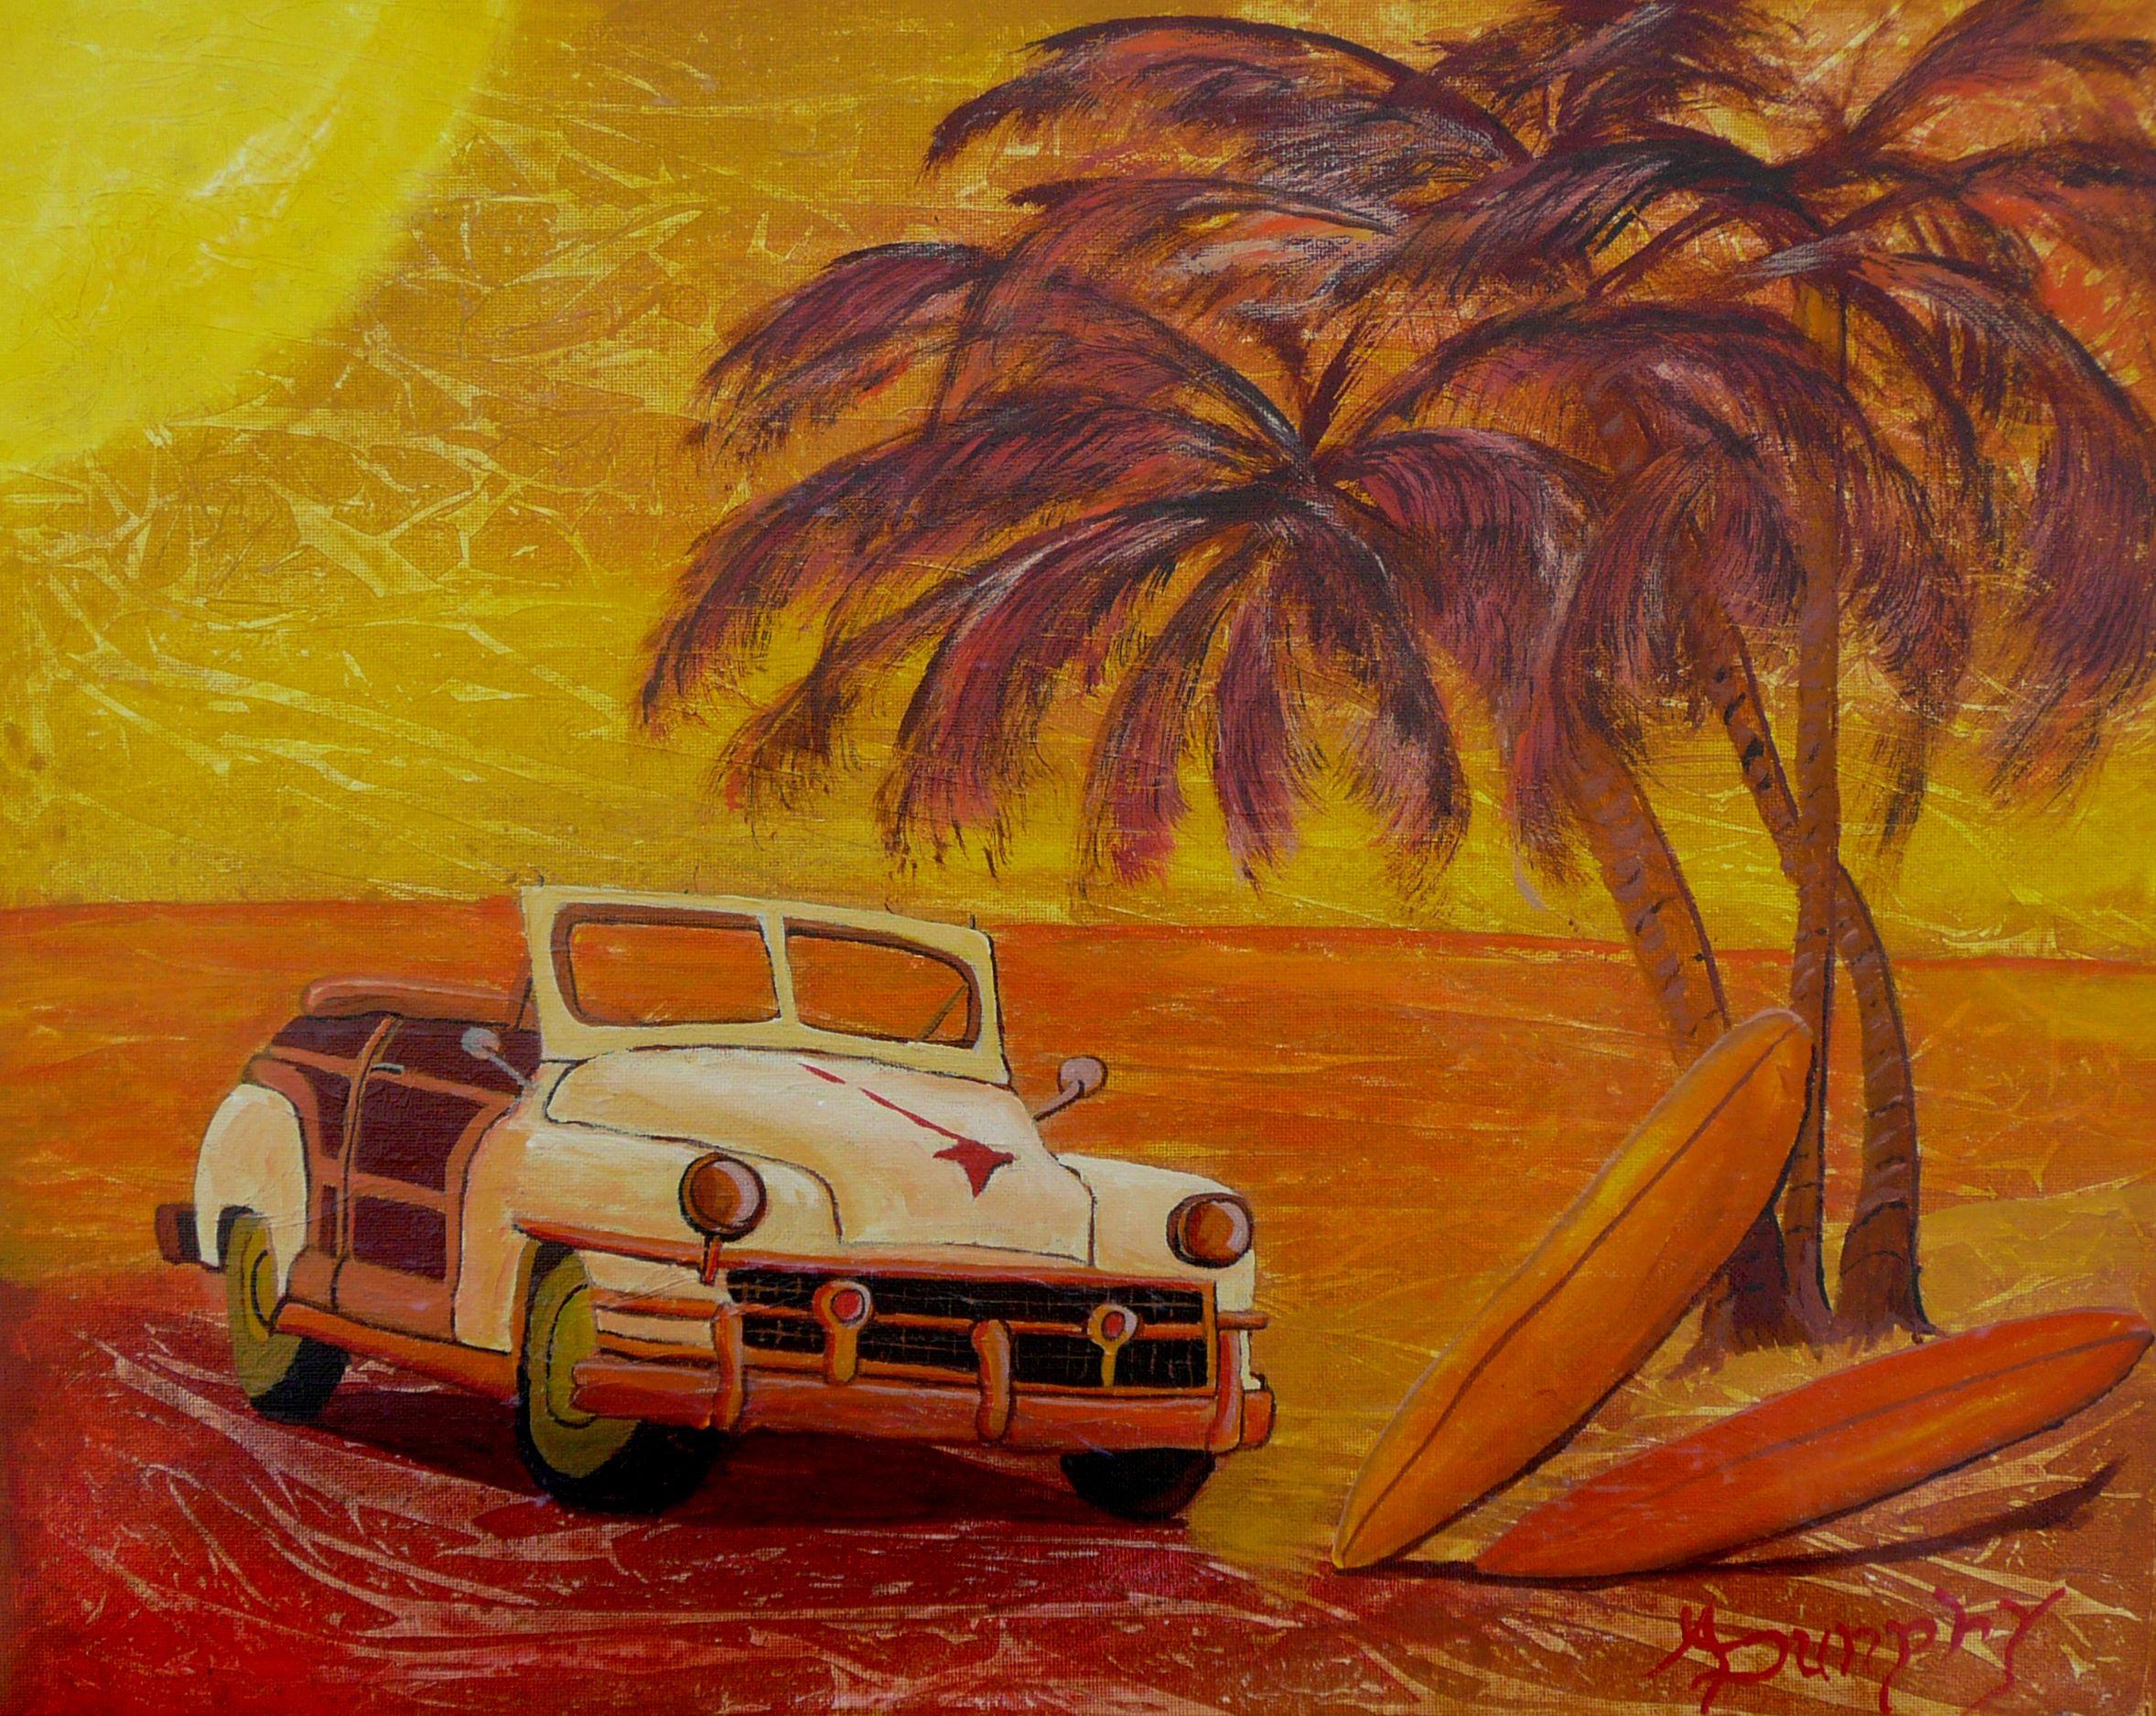 This is a painting of a classic Woody or Chrysler Town and Country sitting on a beach at sunset with a few surfboards under palm trees. The texture has been created using a new technique I recently learned. With it I can give the painting the